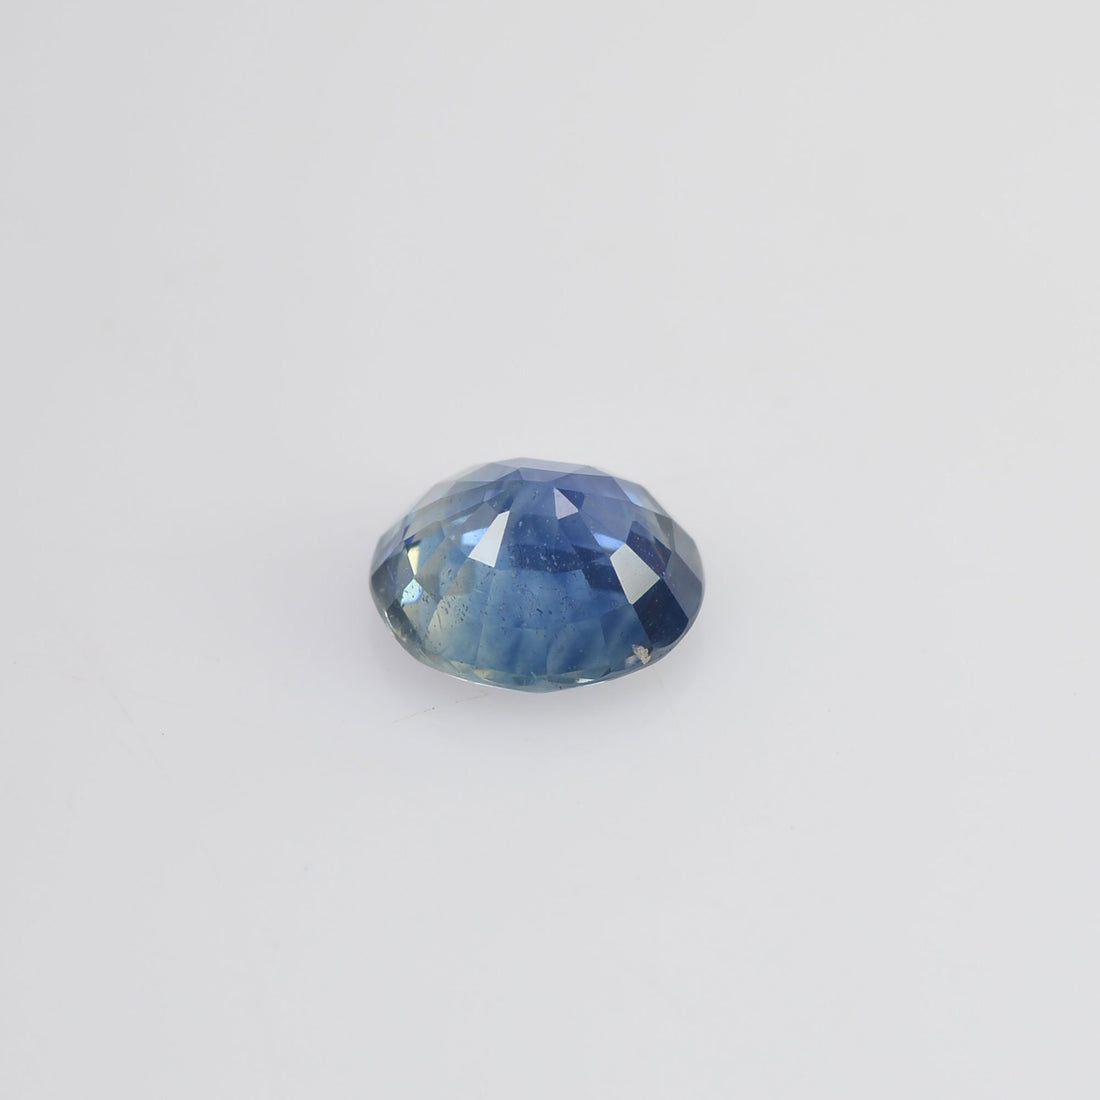 0.71 Cts Natural Blue Sapphire Loose Gemstone Oval Cut